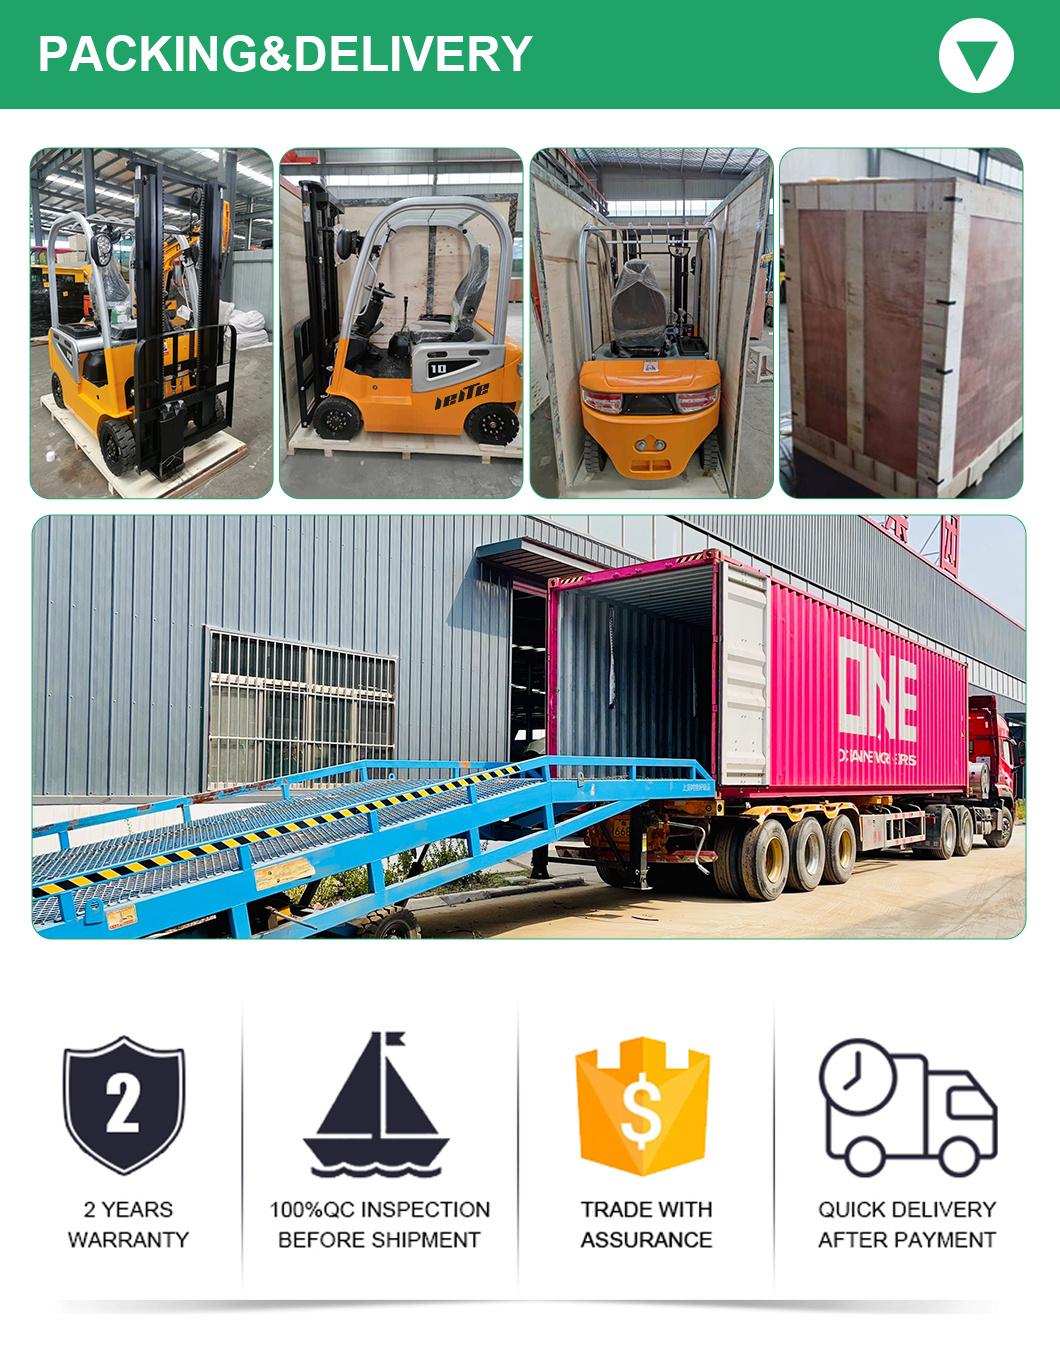 Hot Selling Electric Forklift 1 Ton 2 Ton 3 Ton Lift Truck Hydraulic Stacker Trucks Long Battery Forklift Life